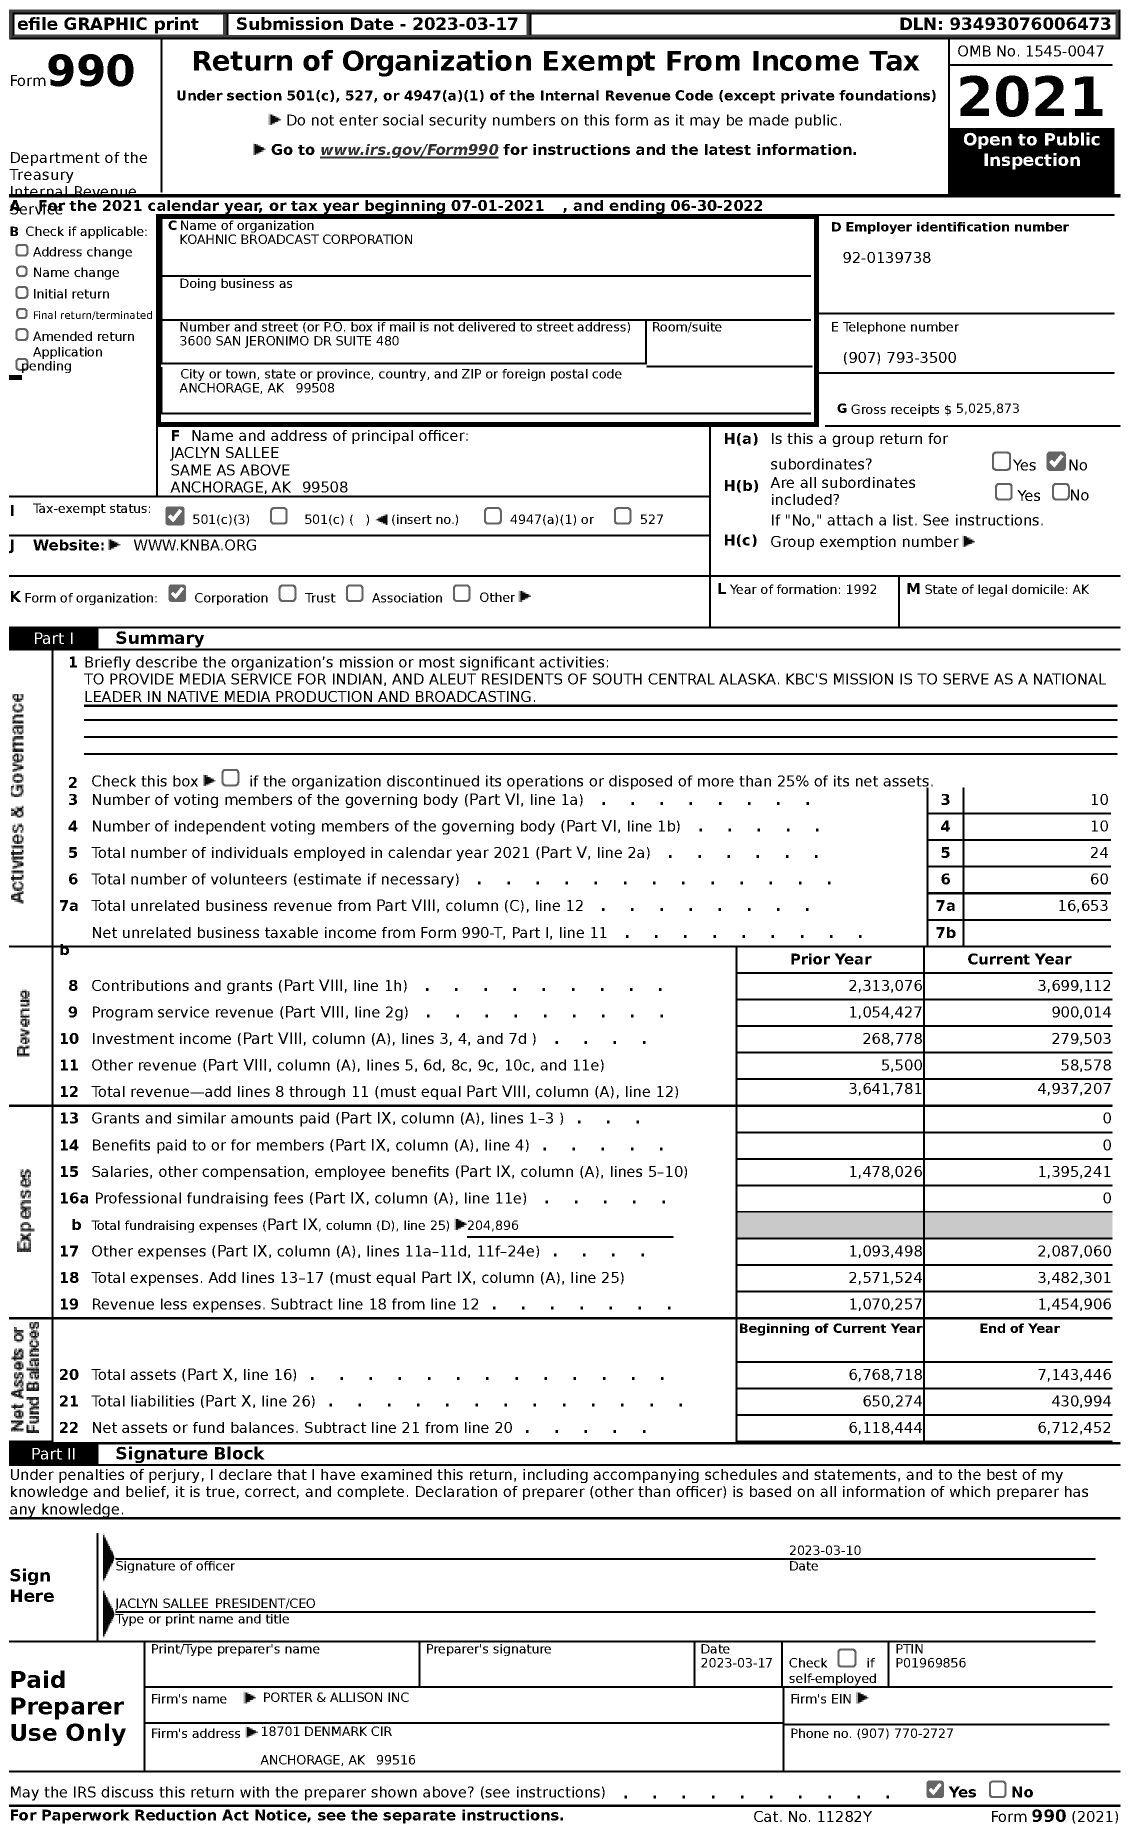 Image of first page of 2021 Form 990 for Koahnic Broadcast Corporation (KBC)